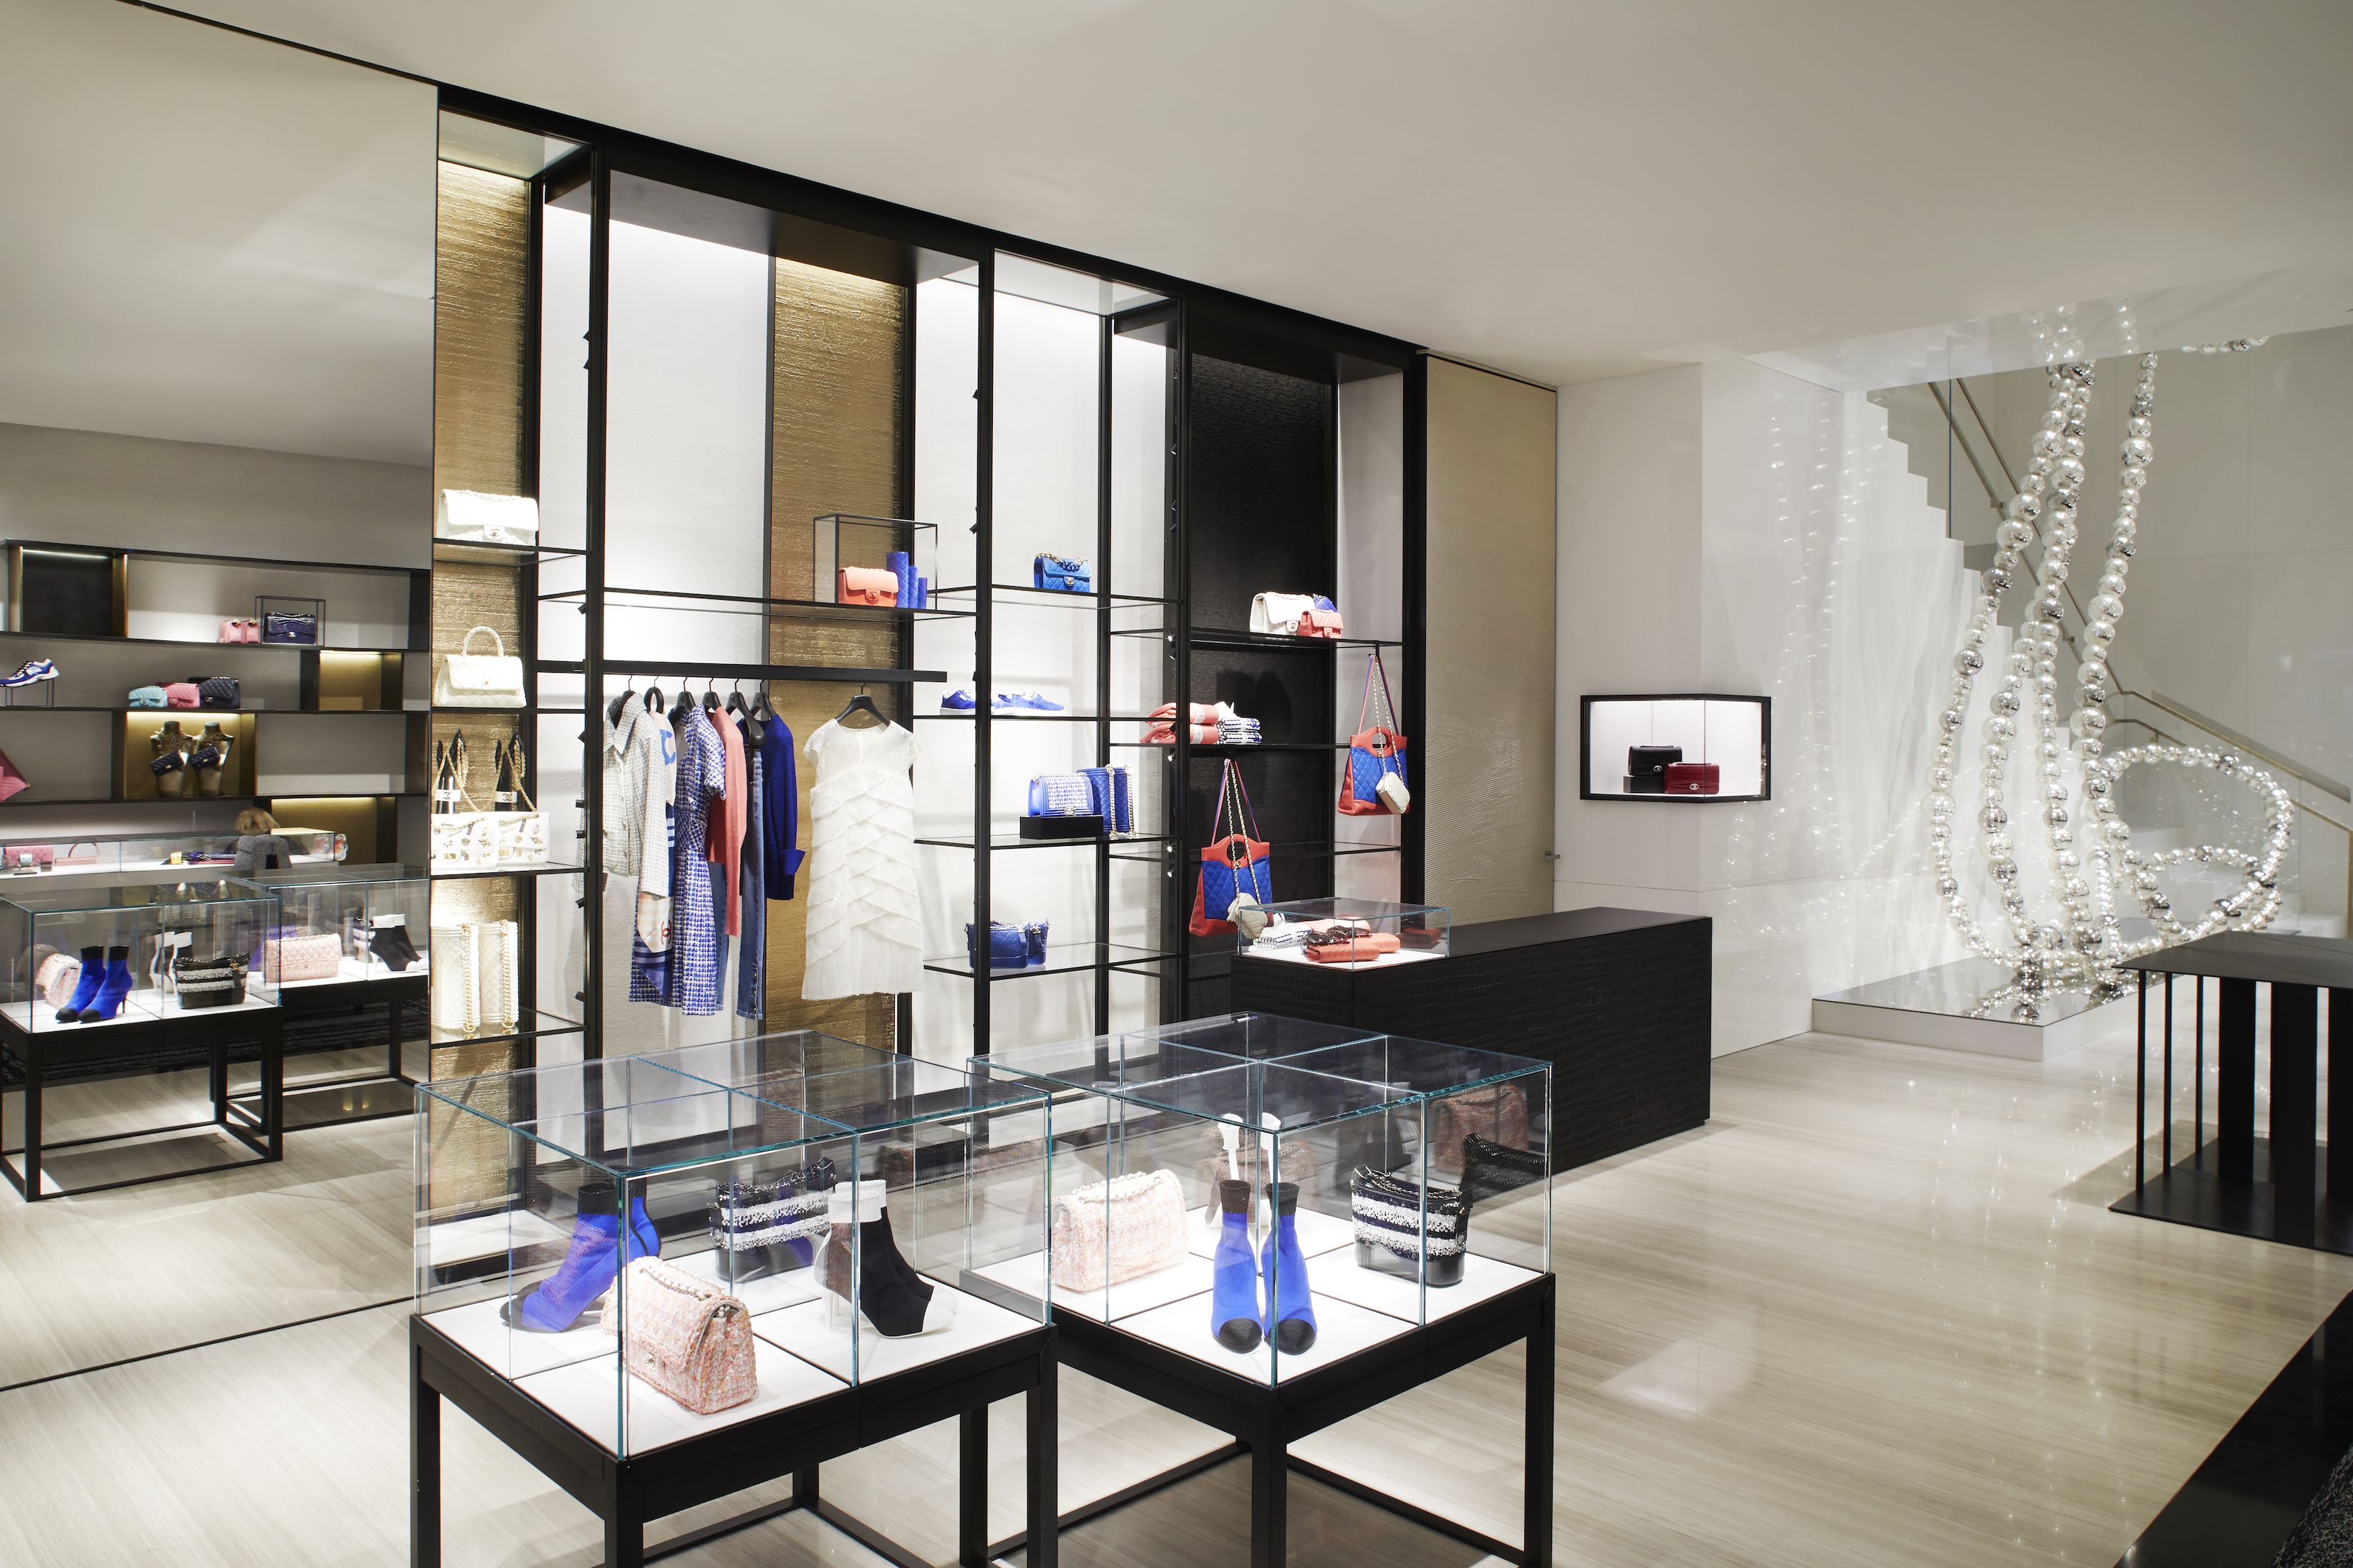 While Brick-and-Mortar Stores Struggle, Nordstrom Opens a NYC Flagship with  Chanel and More